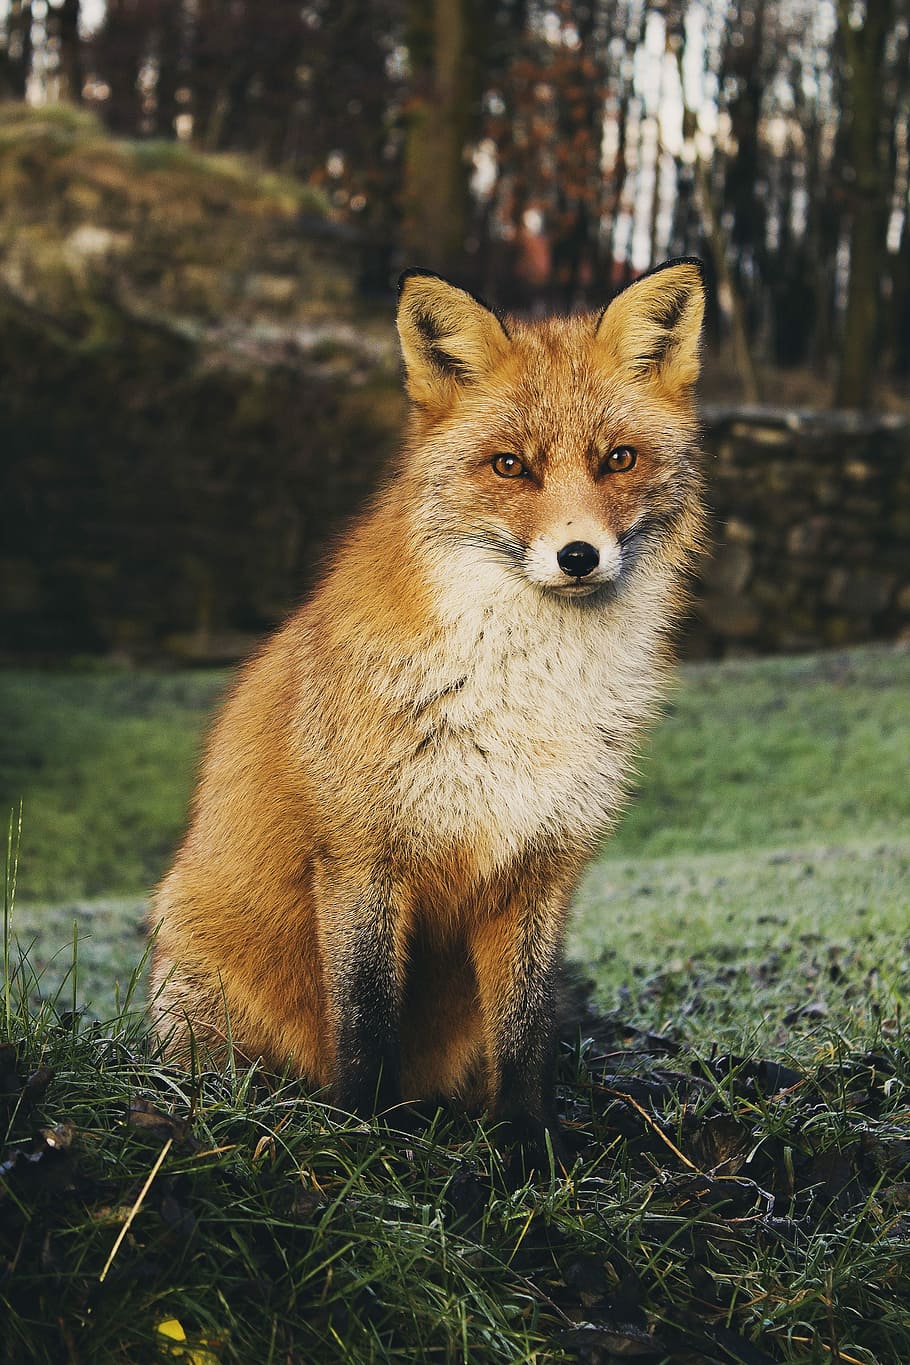 a red fox, Red Fox, animal, fox, mammal, nature, public domain, wildlife, forest, animals In The Wild